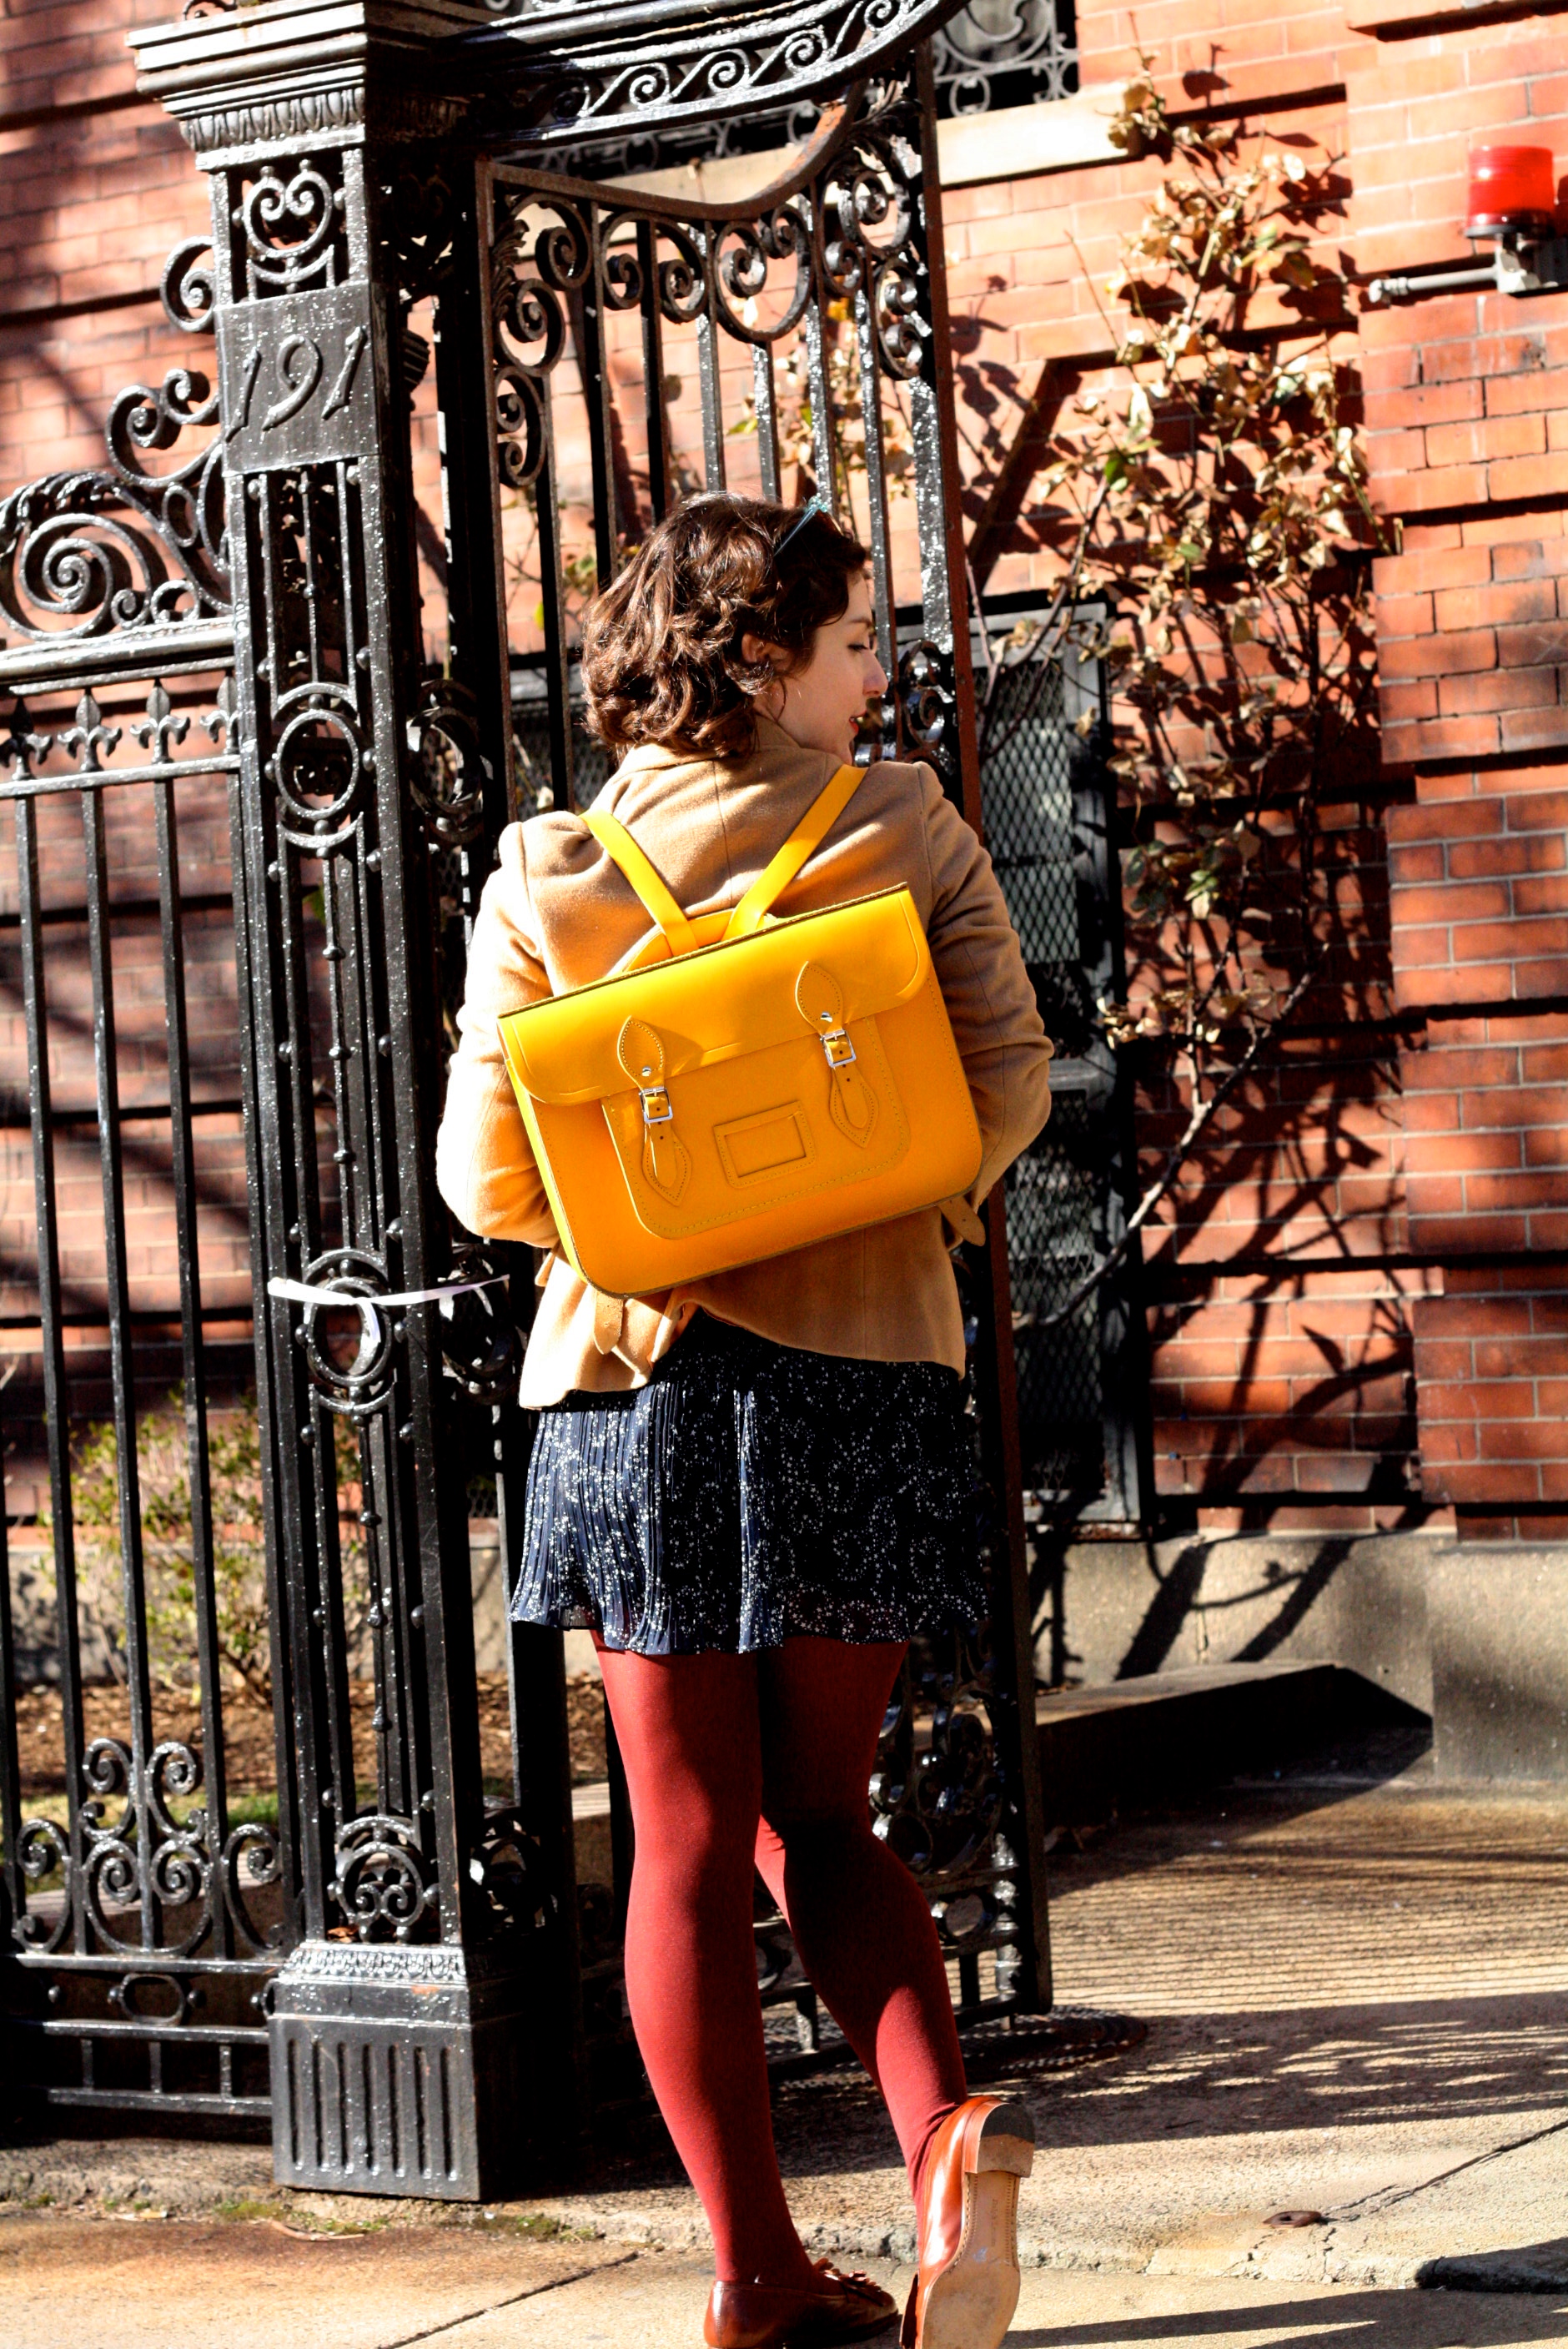 Tights may be too warm, but a yellow backpack is all cool.